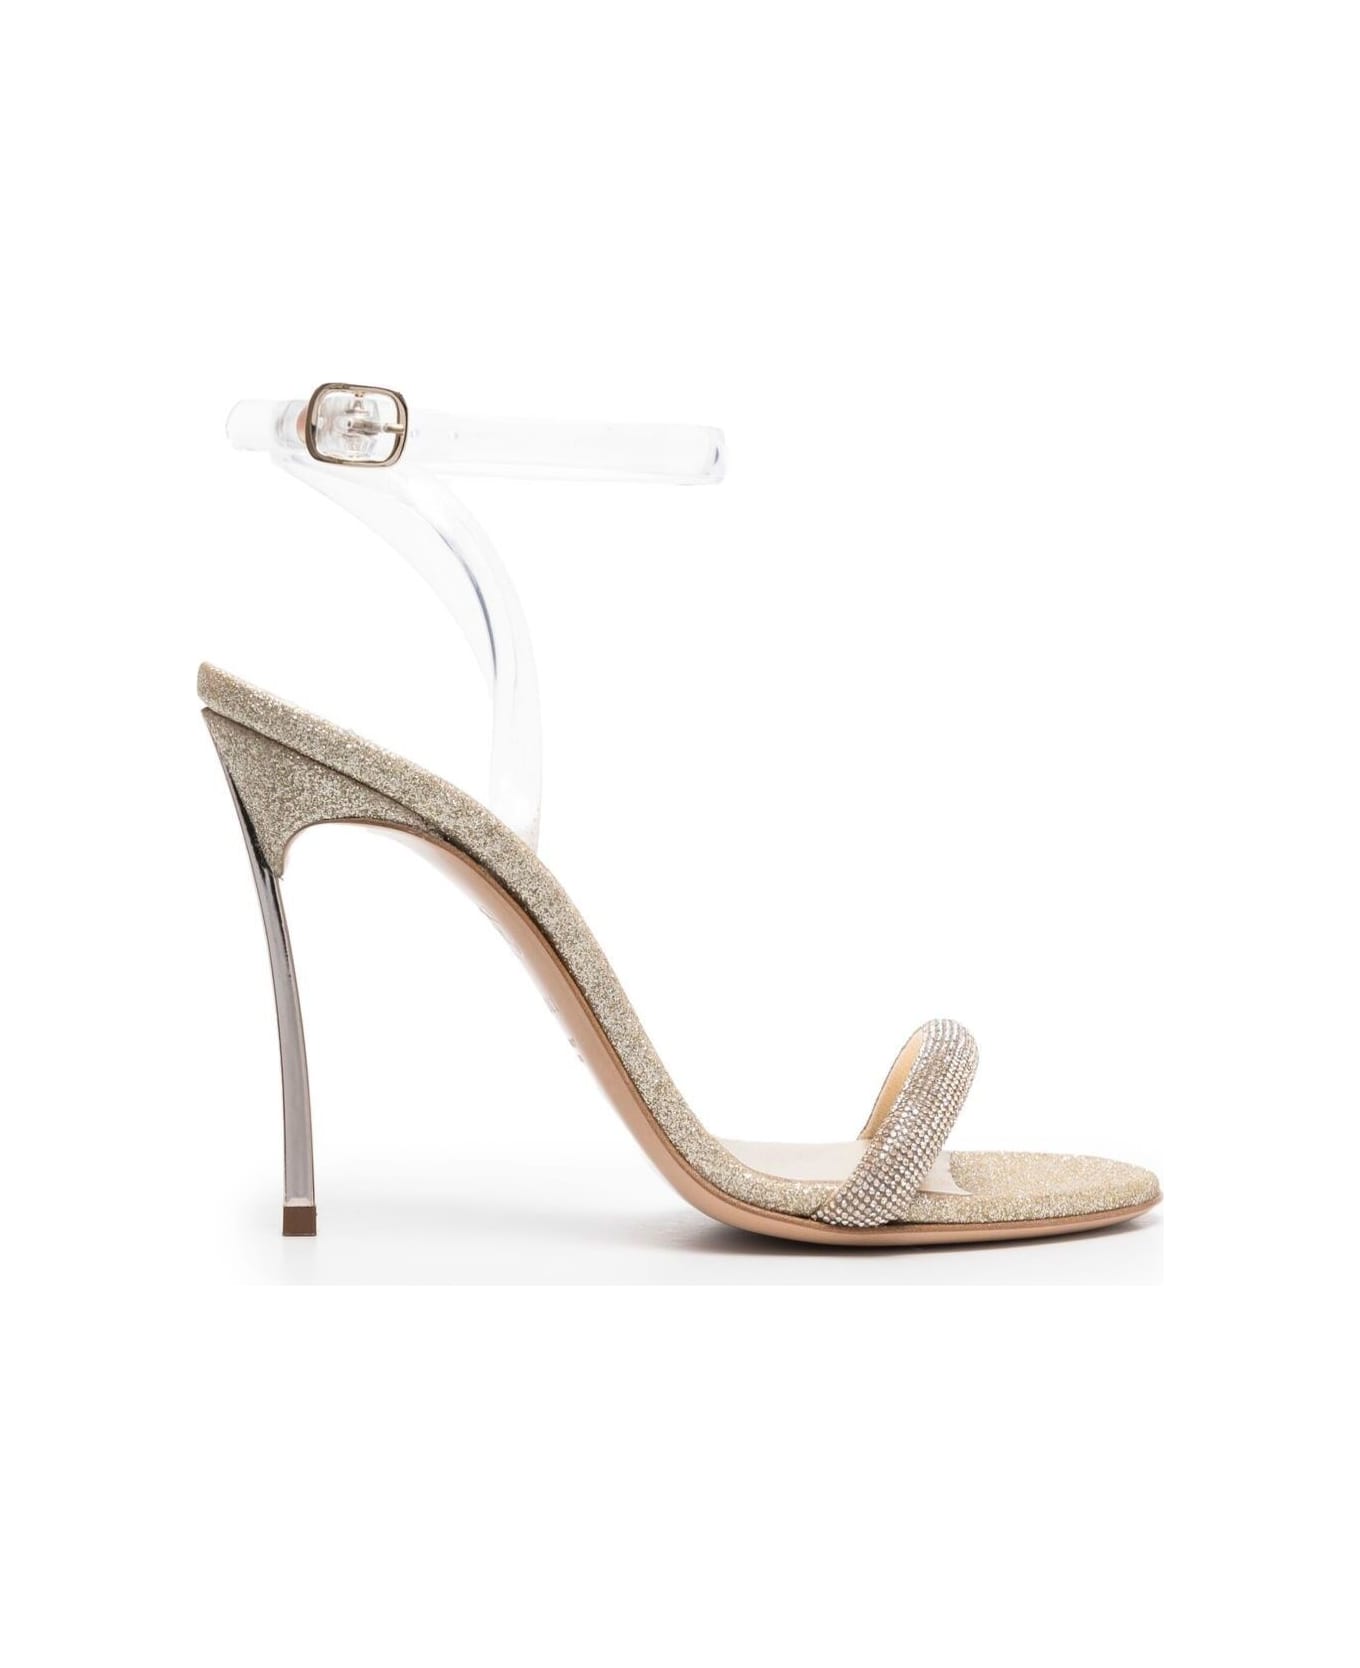 Casadei Gold-tone Glitteres Sandals With Stiletto Heel In Leather Woman - Honey Goldust